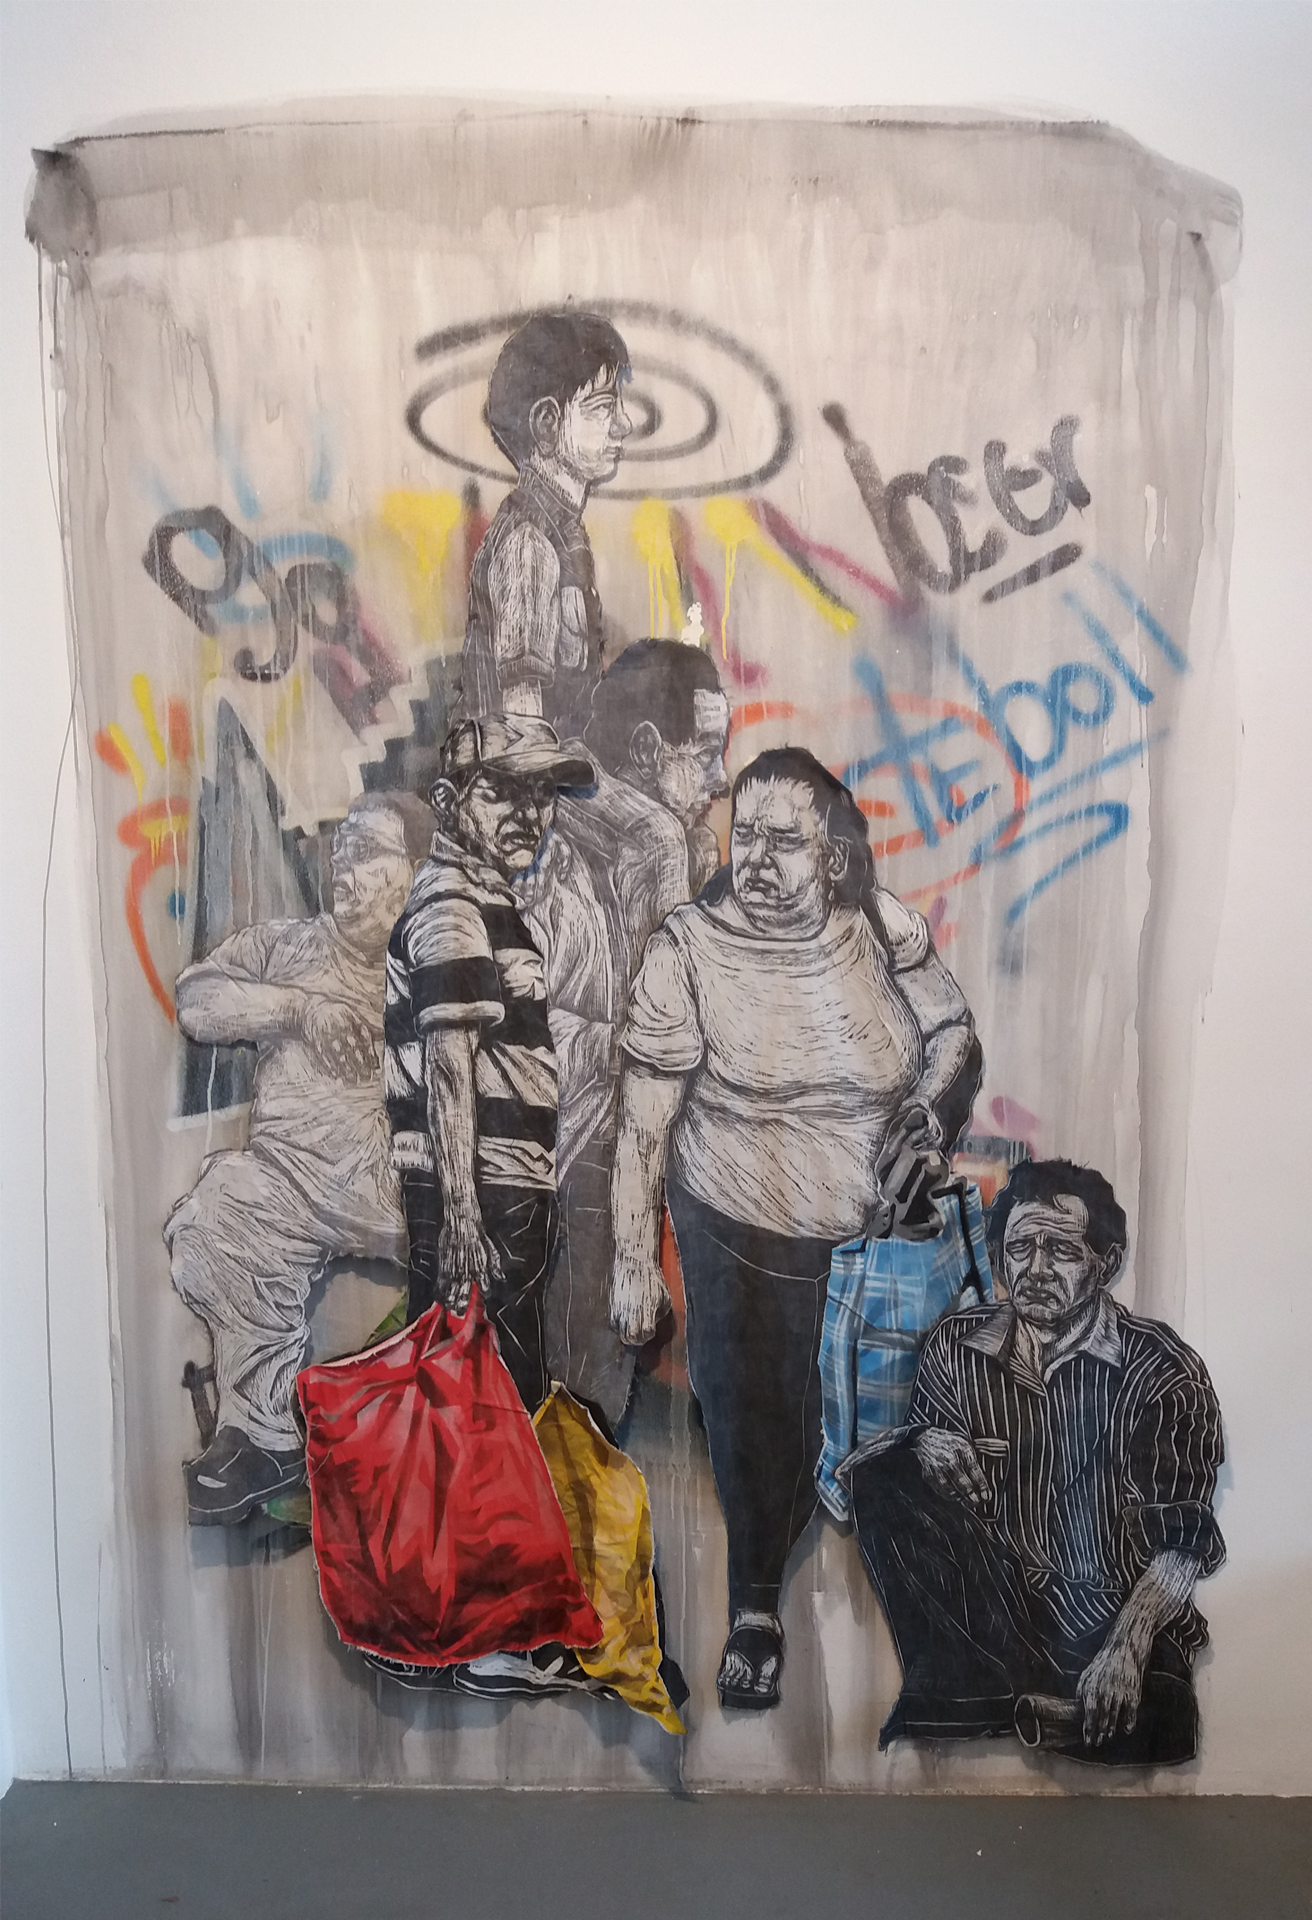 A group of large scale relief printed figures are arranged with varying opacity of ink to imply atmospheric perspective. The figures, referencing the working class are situated among graffiti